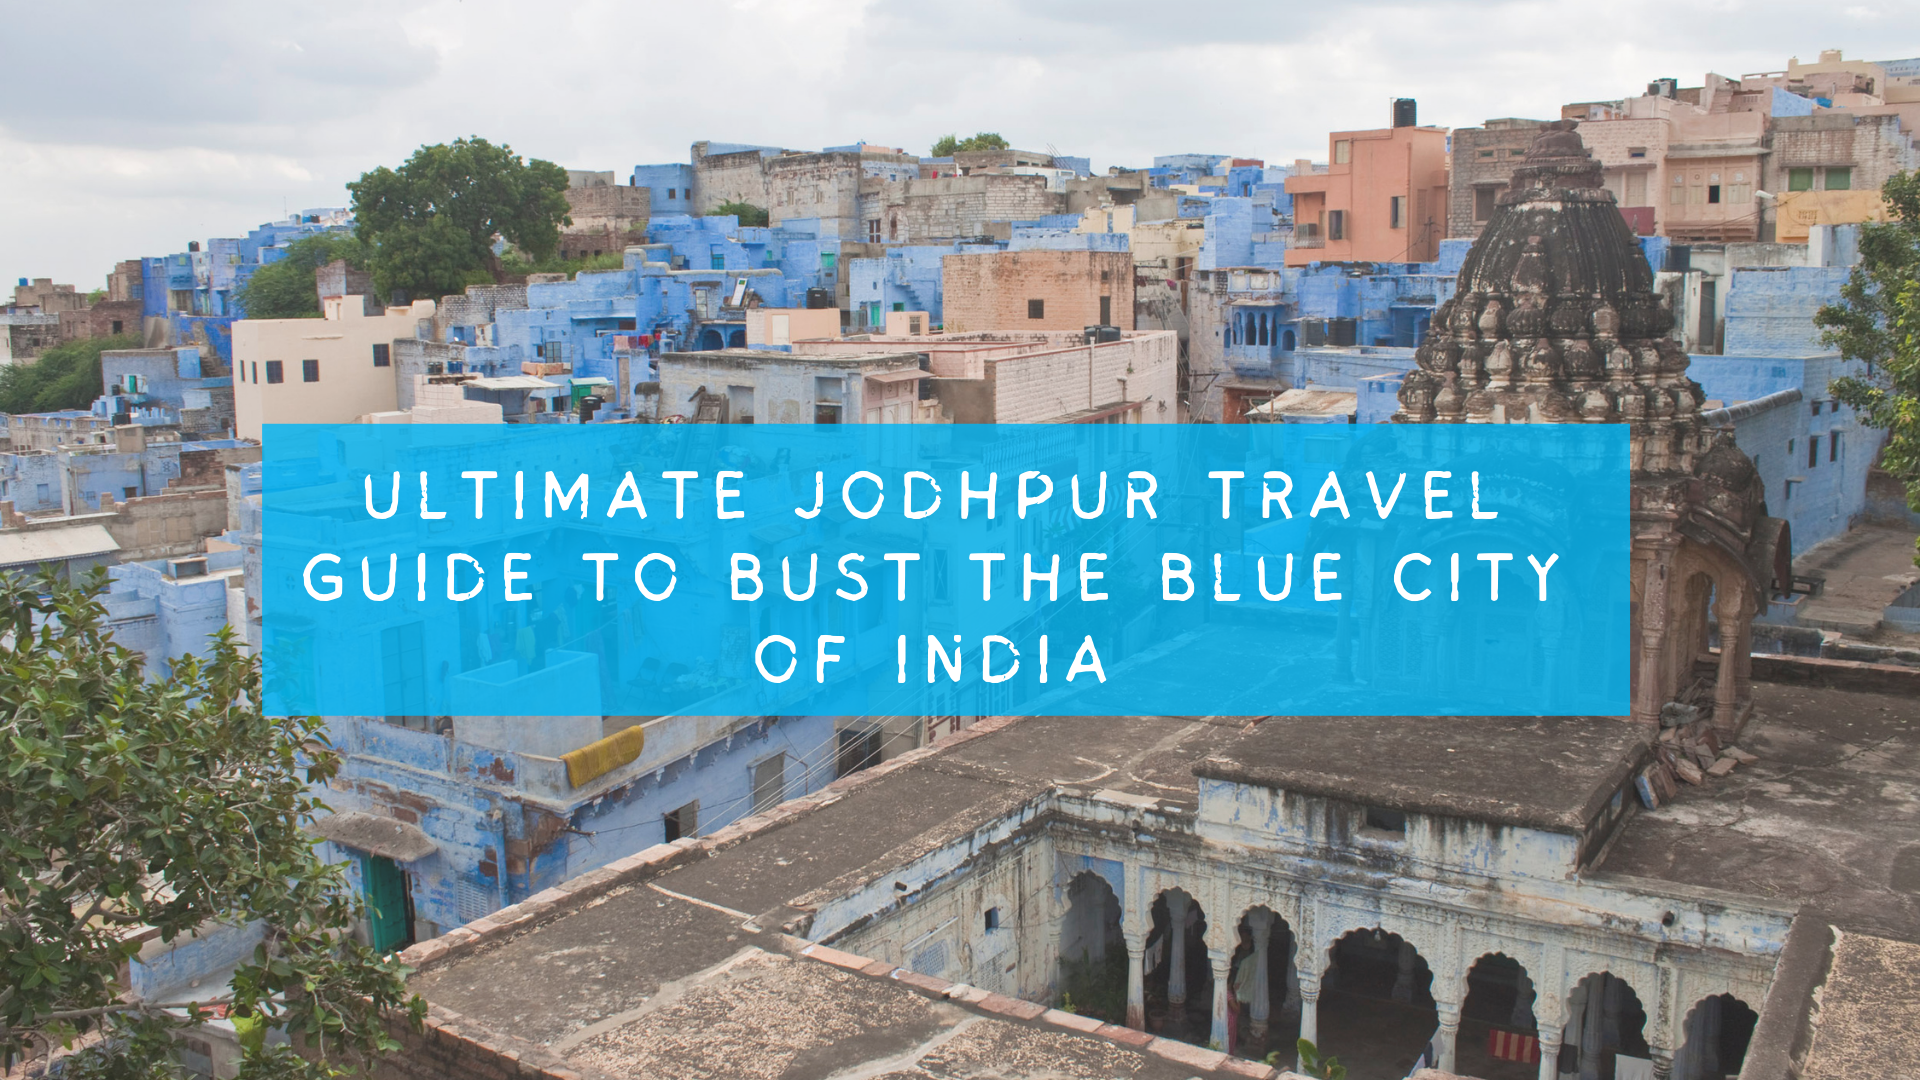 Ultimate Jodhpur Travel Guide to Bust the Blue City of India